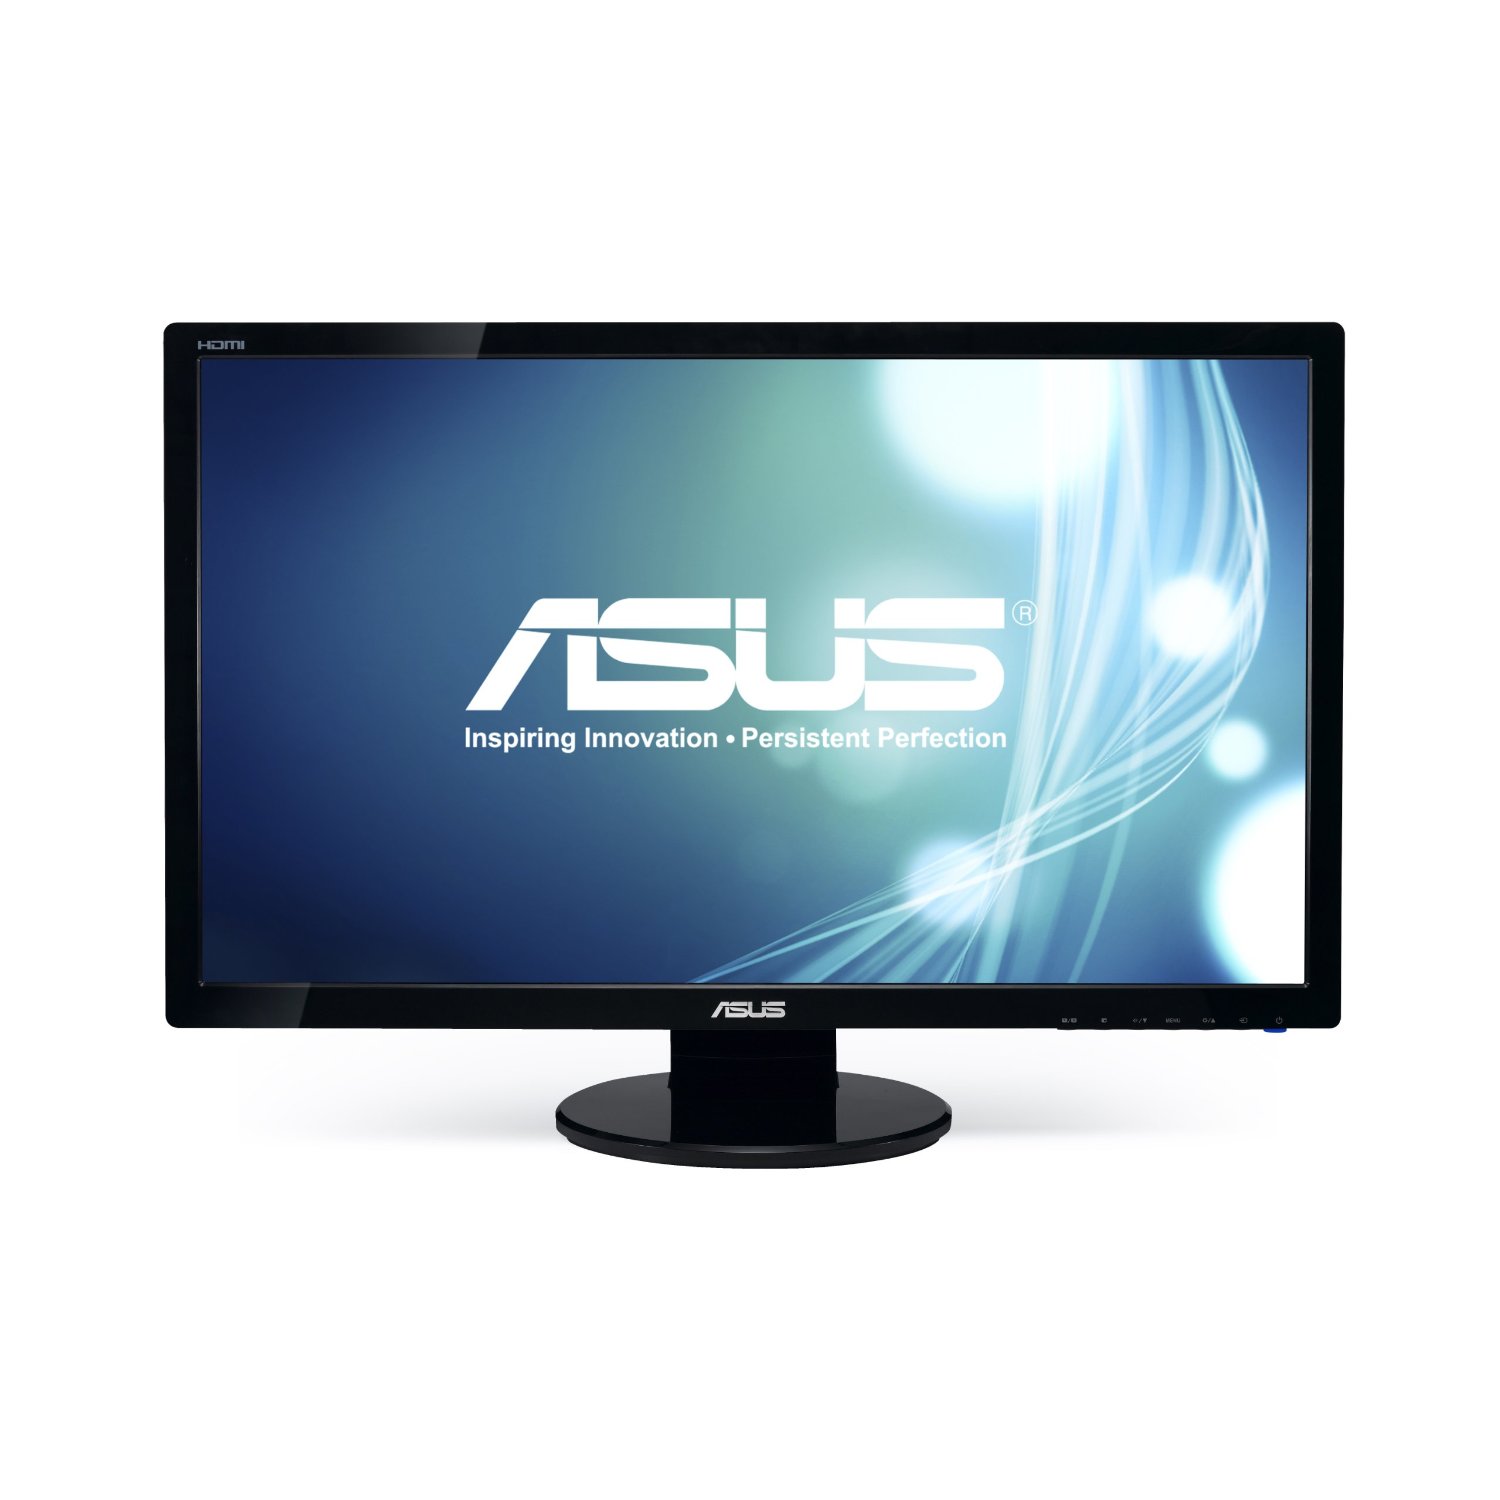 http://thetechjournal.com/wp-content/uploads/images/1110/1319692762-asus-ve276q-27inch-wide-2ms-response-time-display-port-lcd-monitor-1.jpg